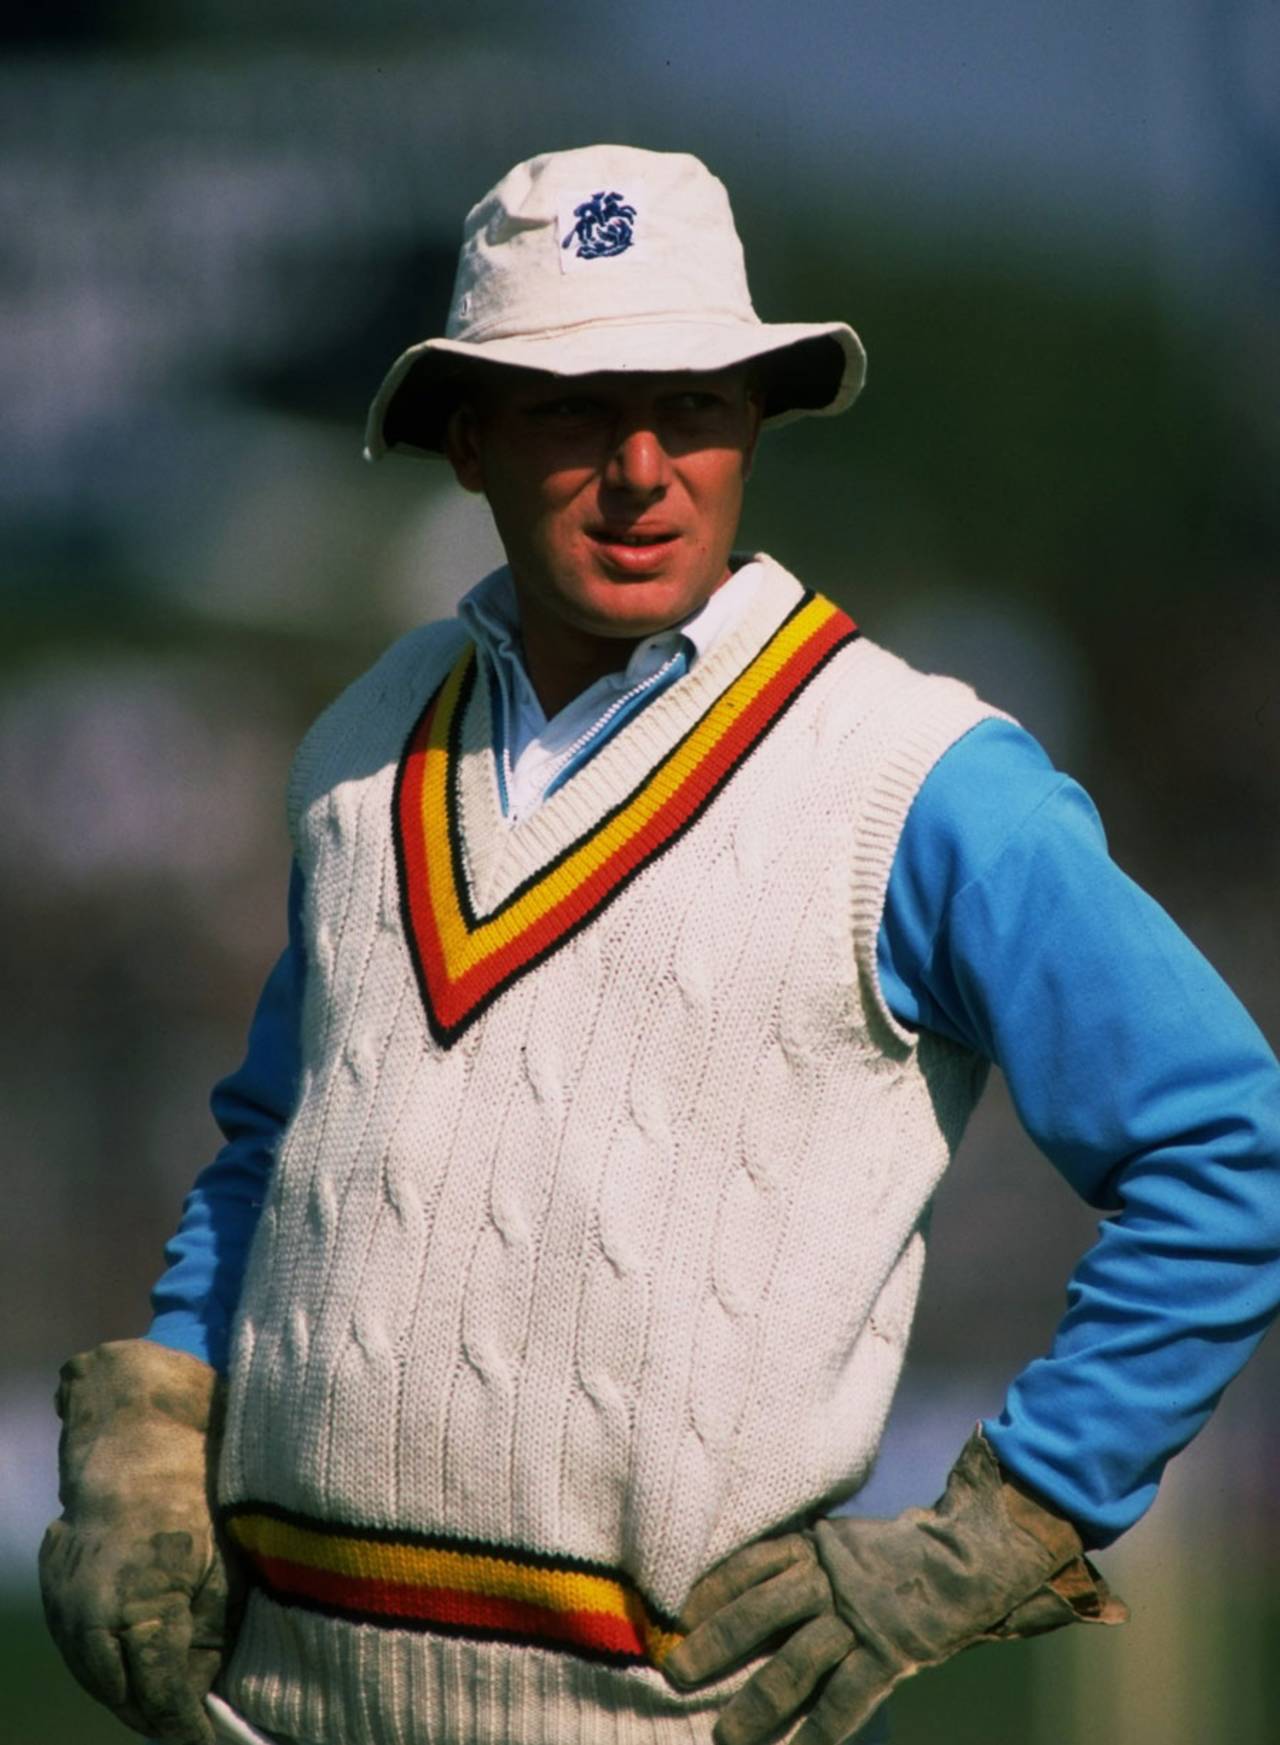 Paul Downton played 30 Tests and 28 one-day internationals for England&nbsp;&nbsp;&bull;&nbsp;&nbsp;Getty Images